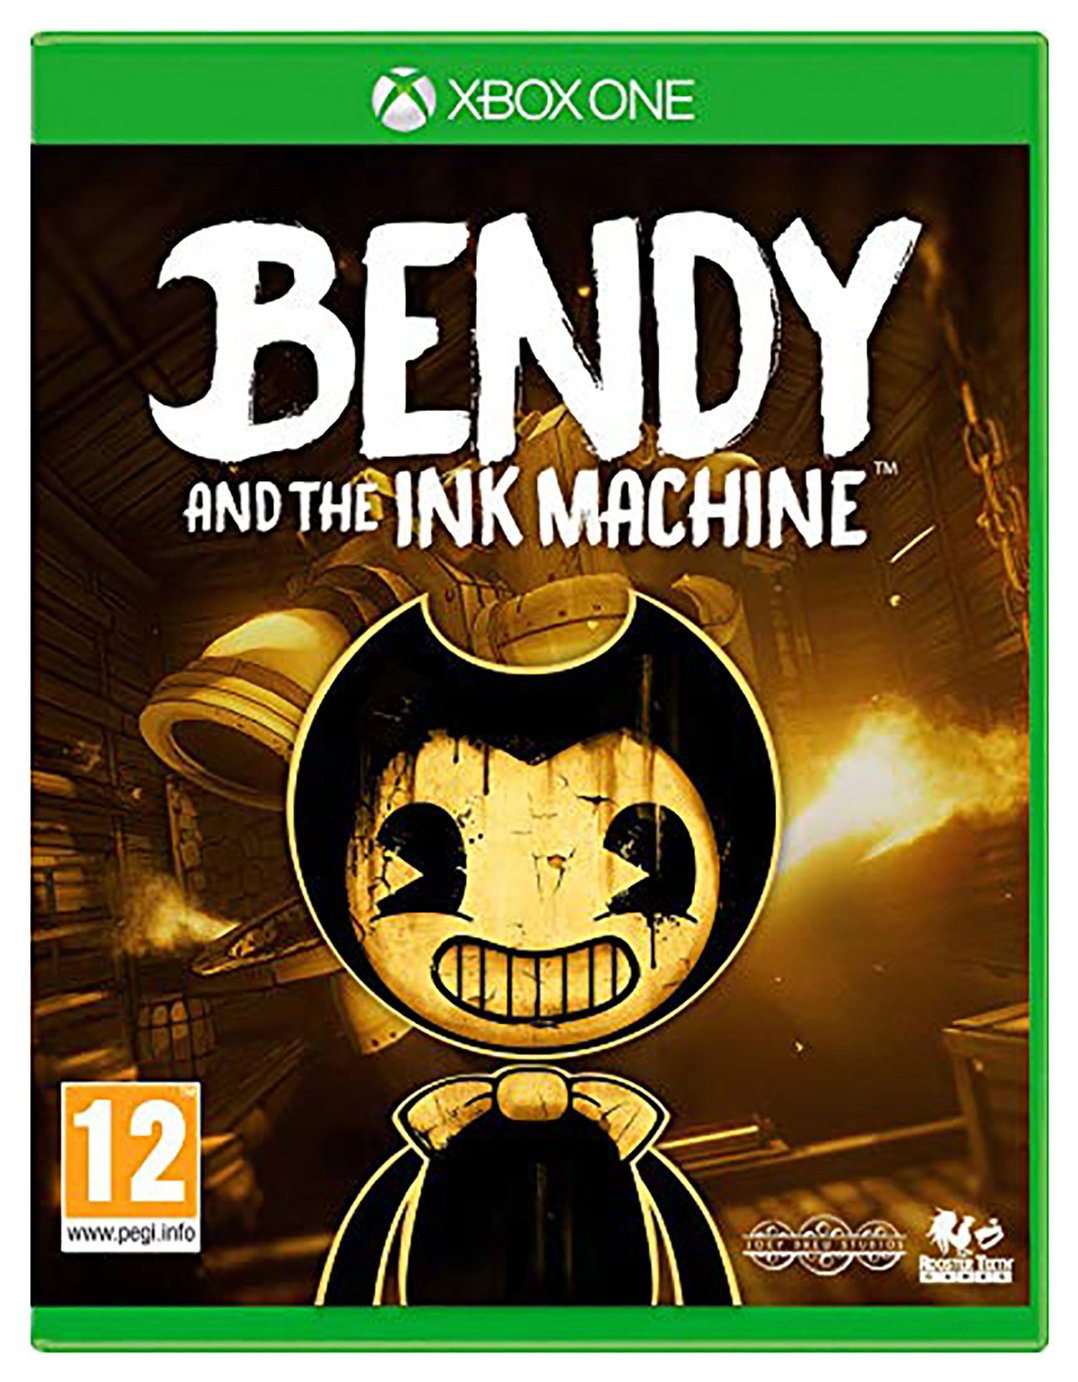 bendy and the ink machine xbox 360